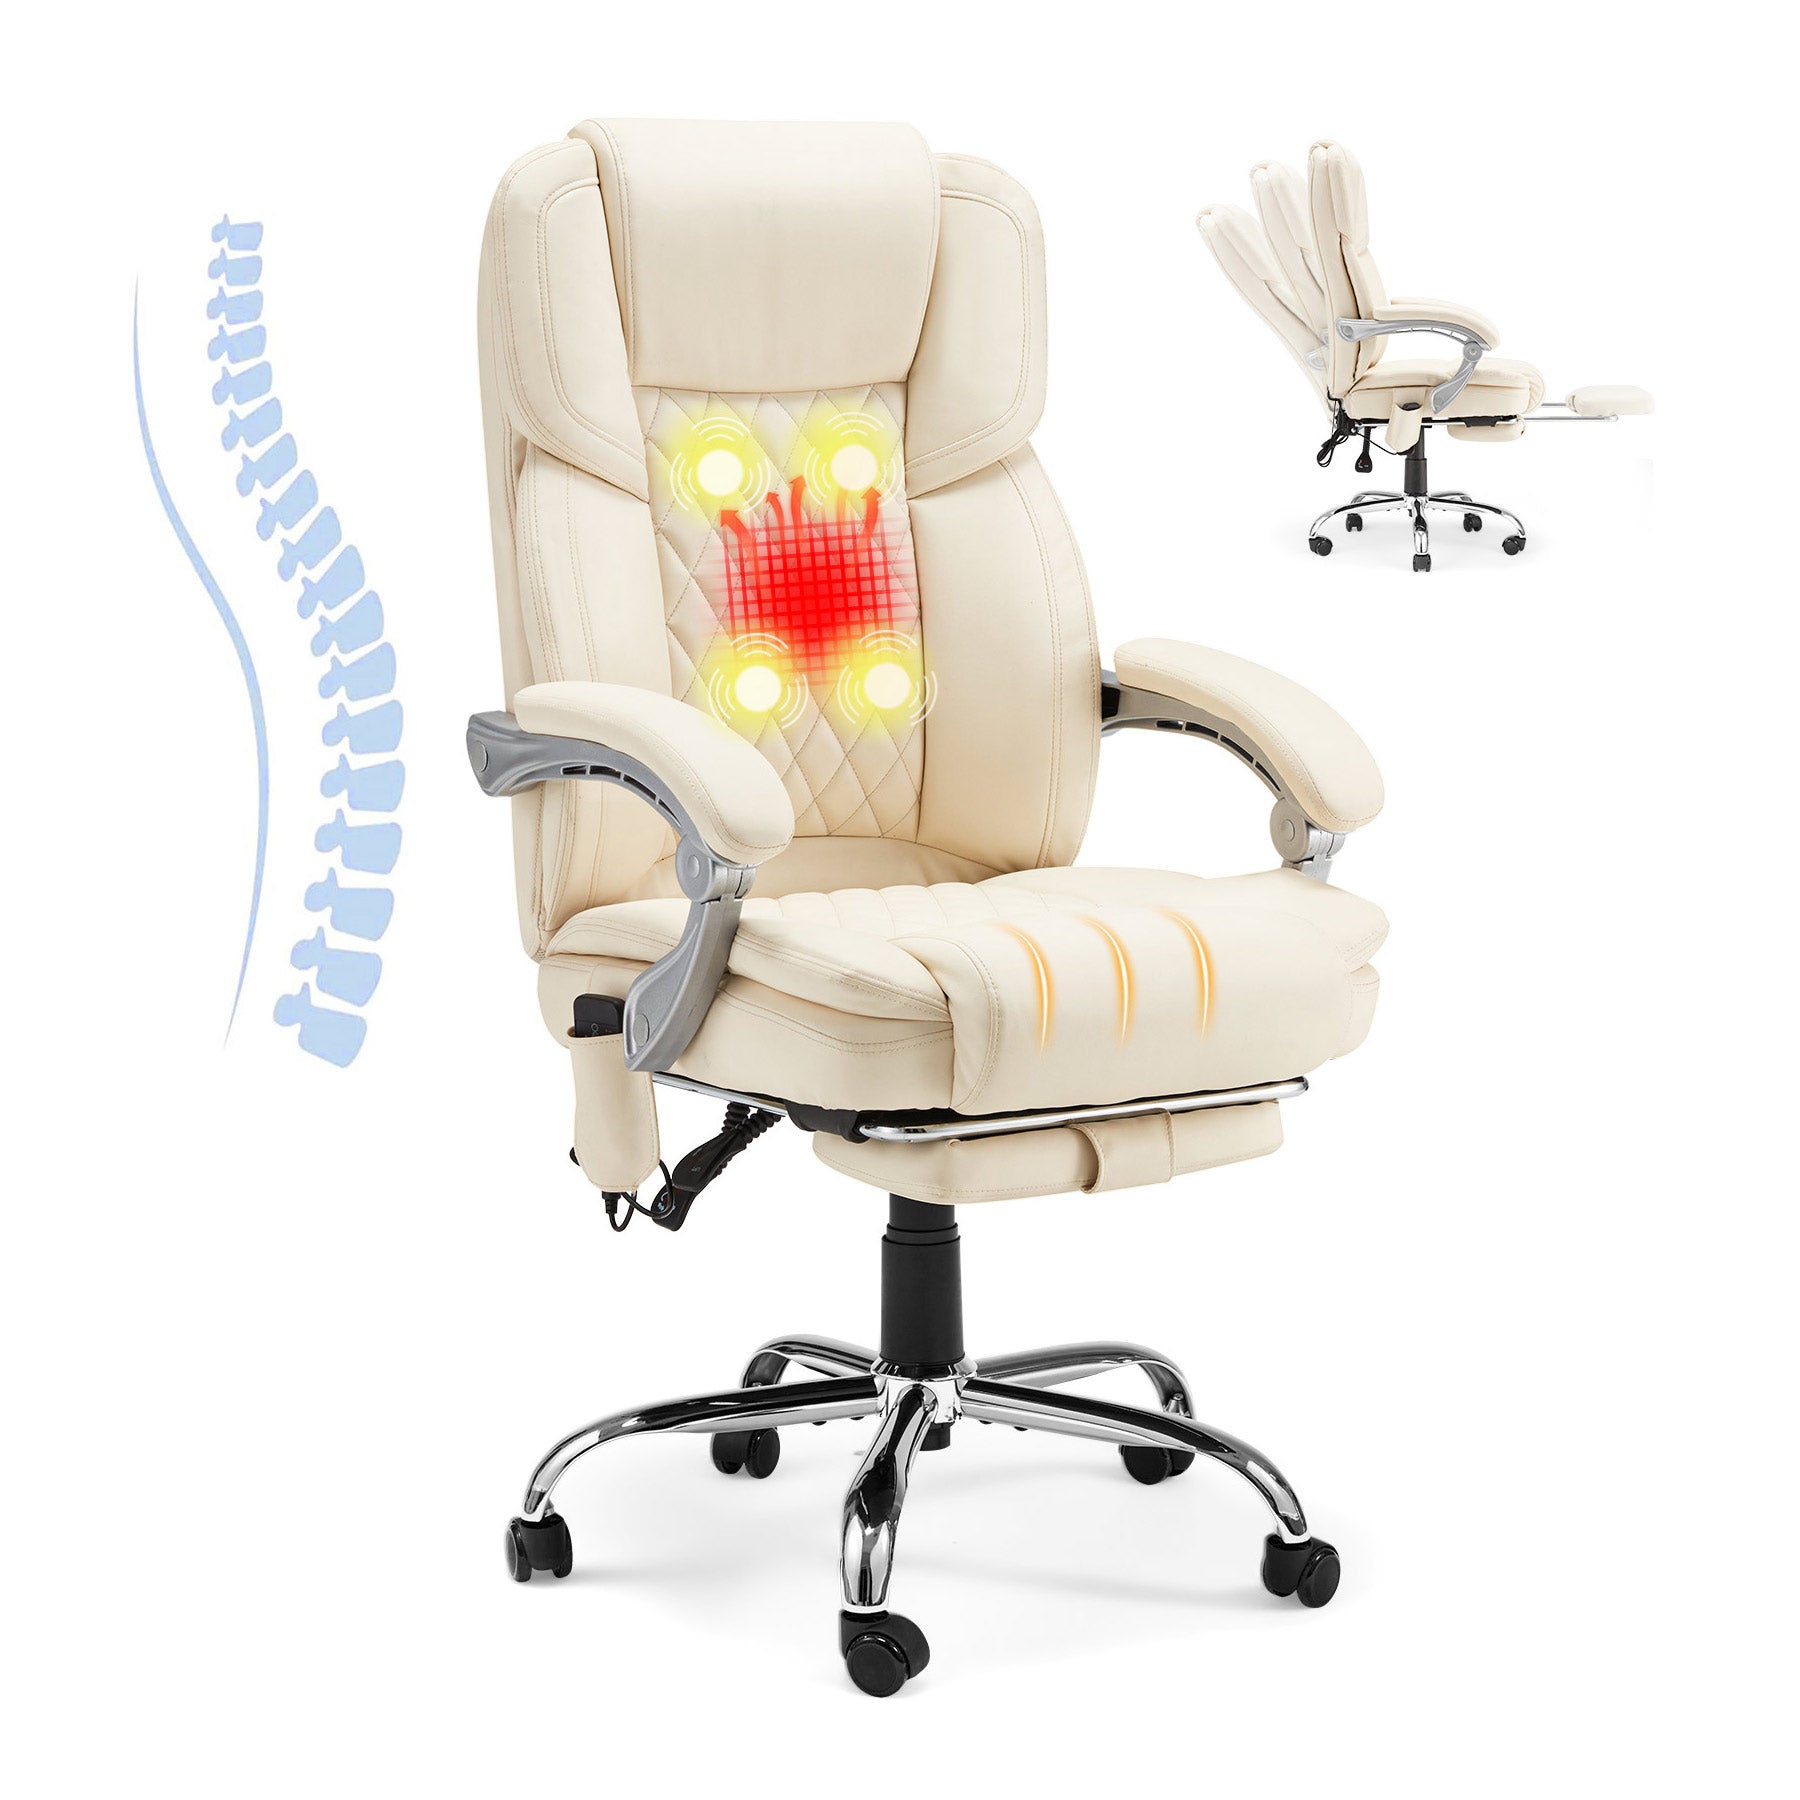 homrest-executive-office-chair-ergonomic-desk-chair-big-and-tall-massage-and-heated-white